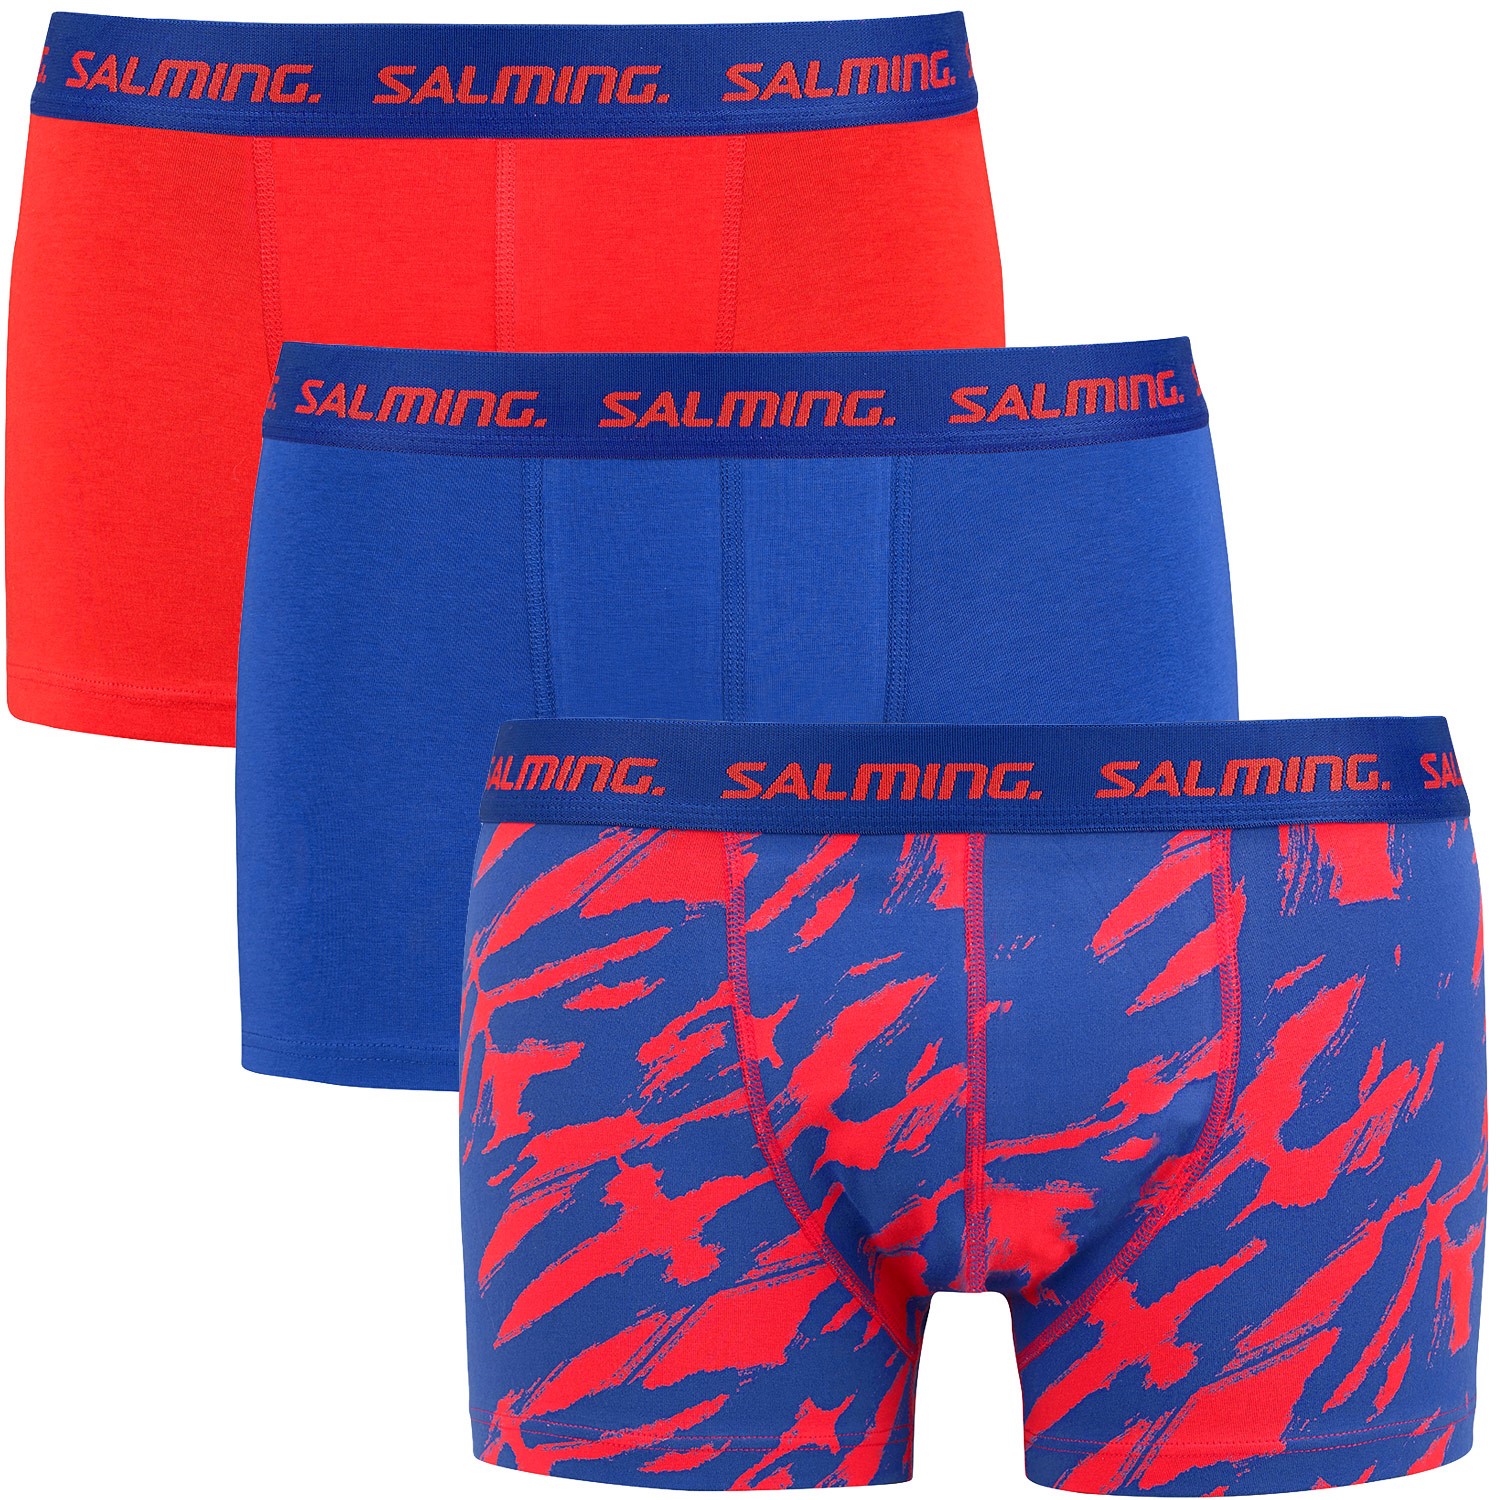 Salming Stafford Boxer